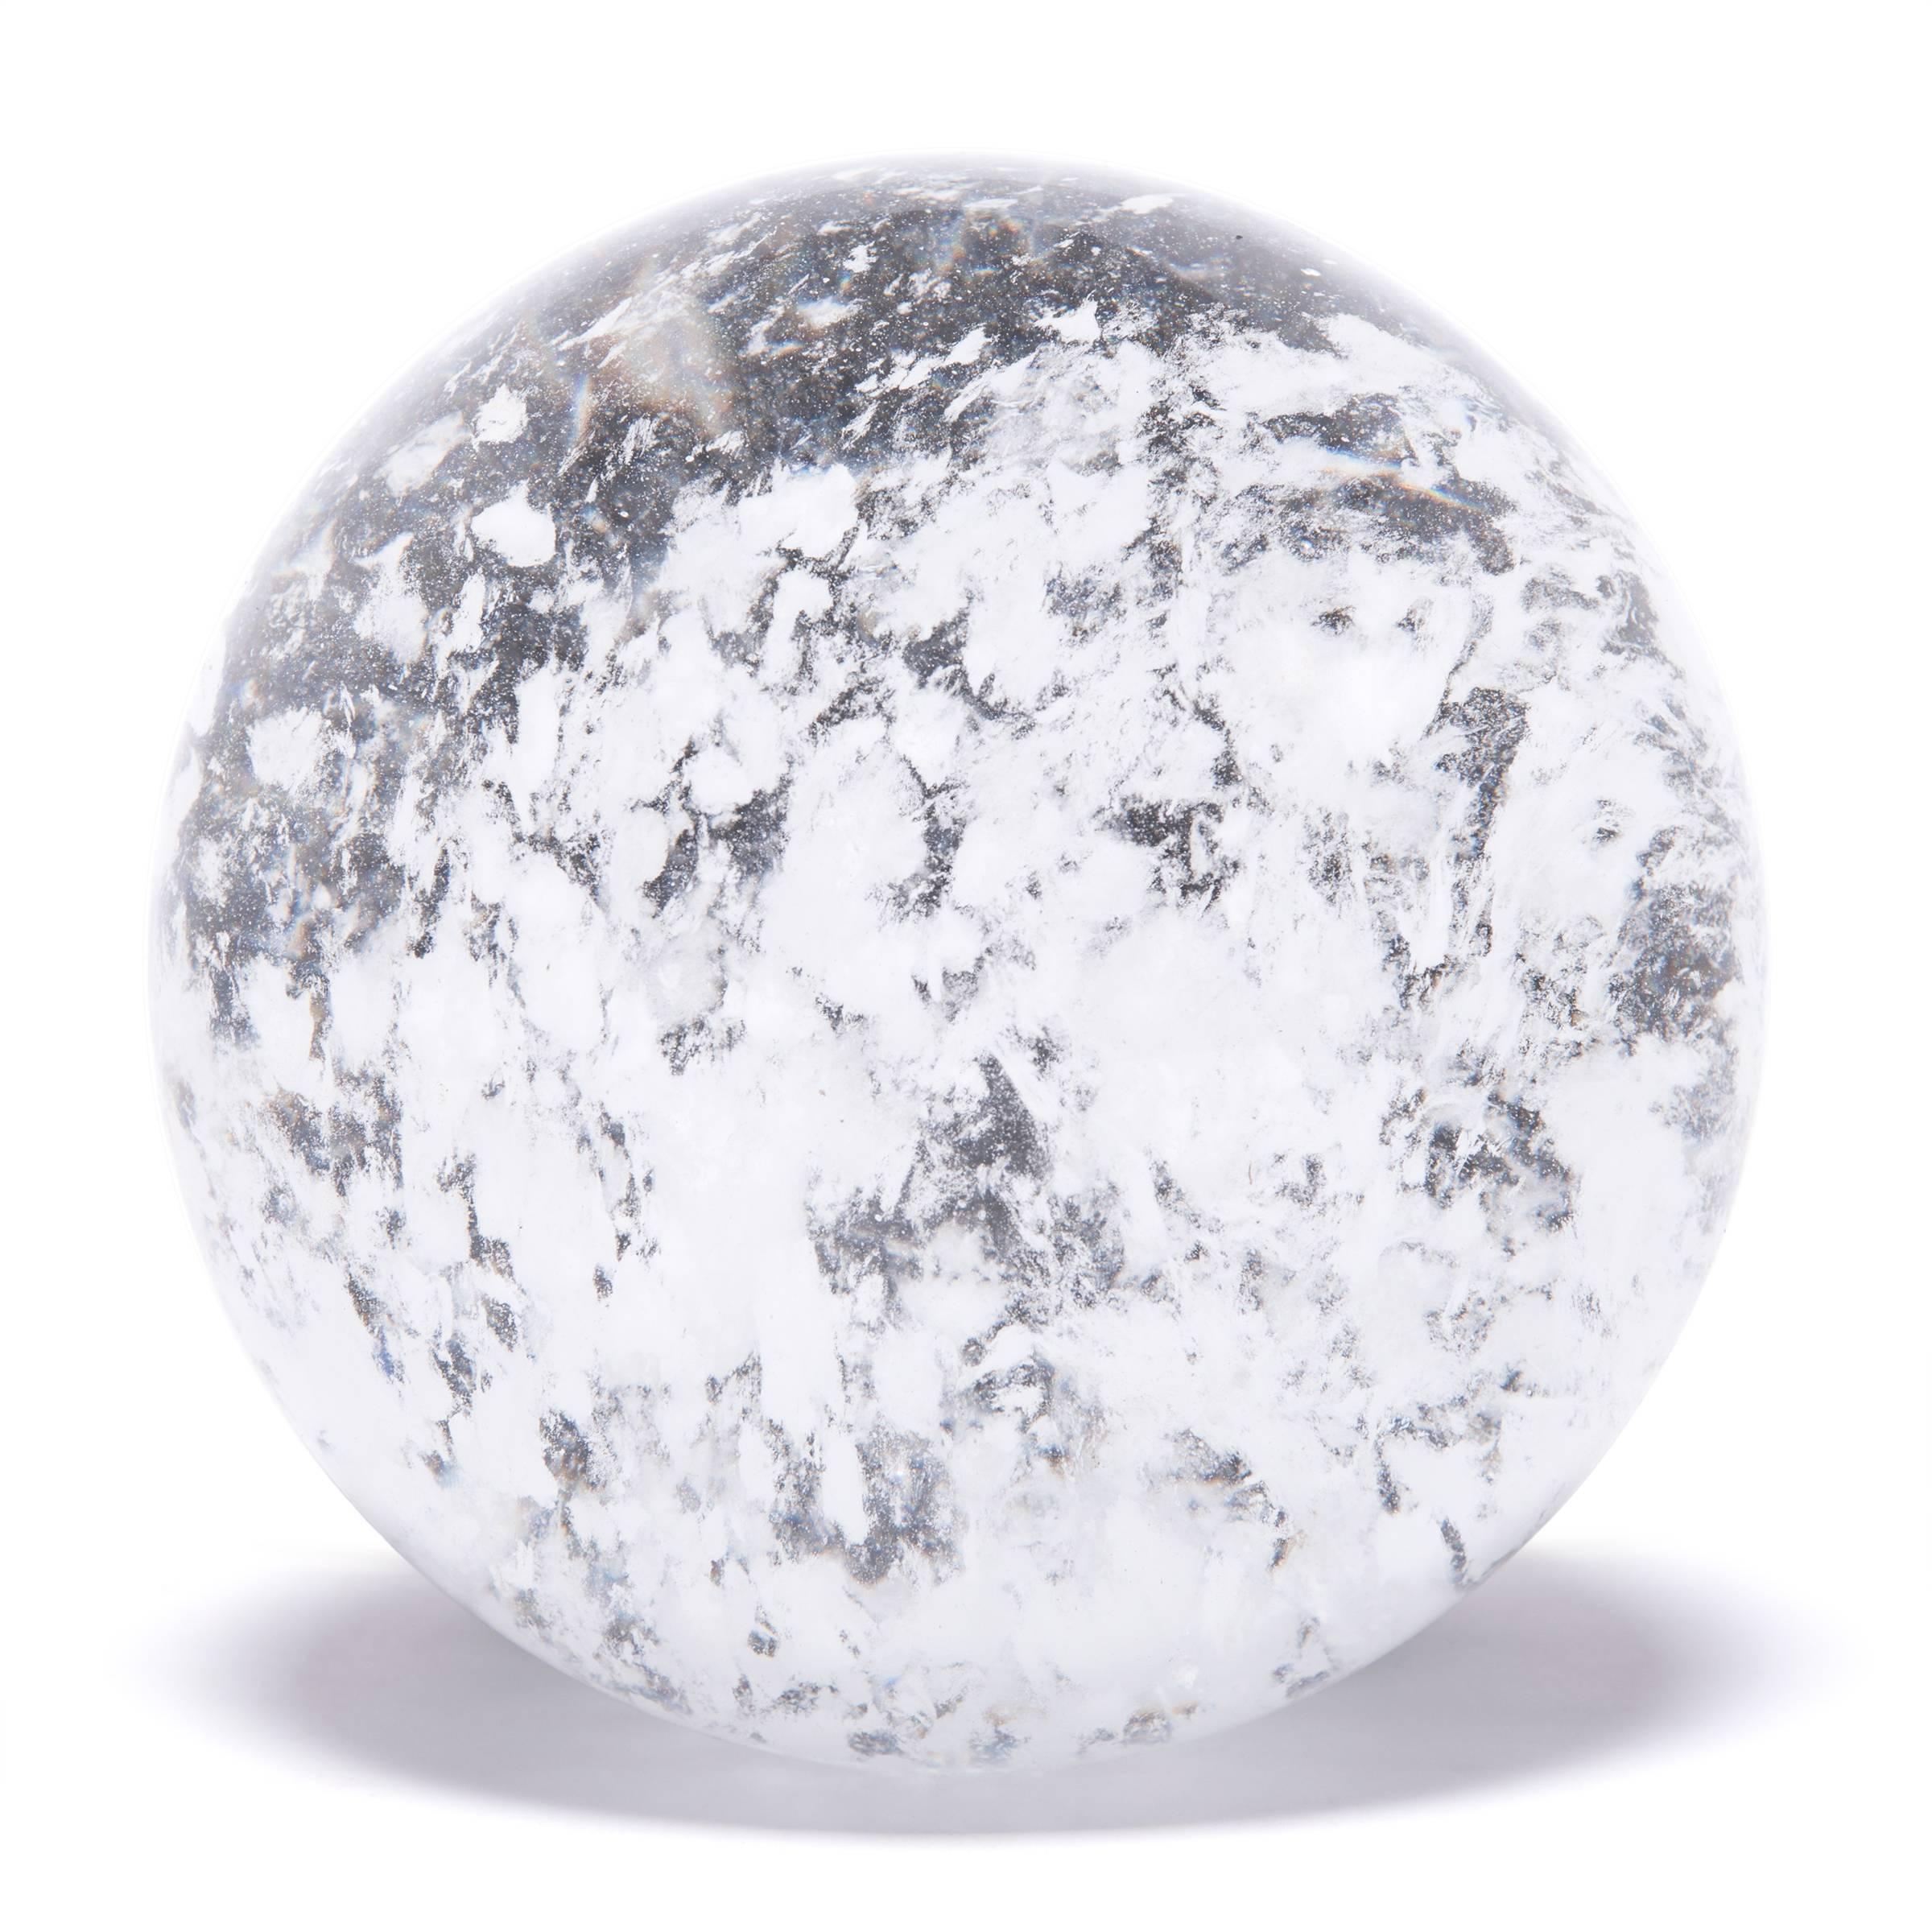 Contemporary Chinese Rock Crystal Sphere with Occlusions